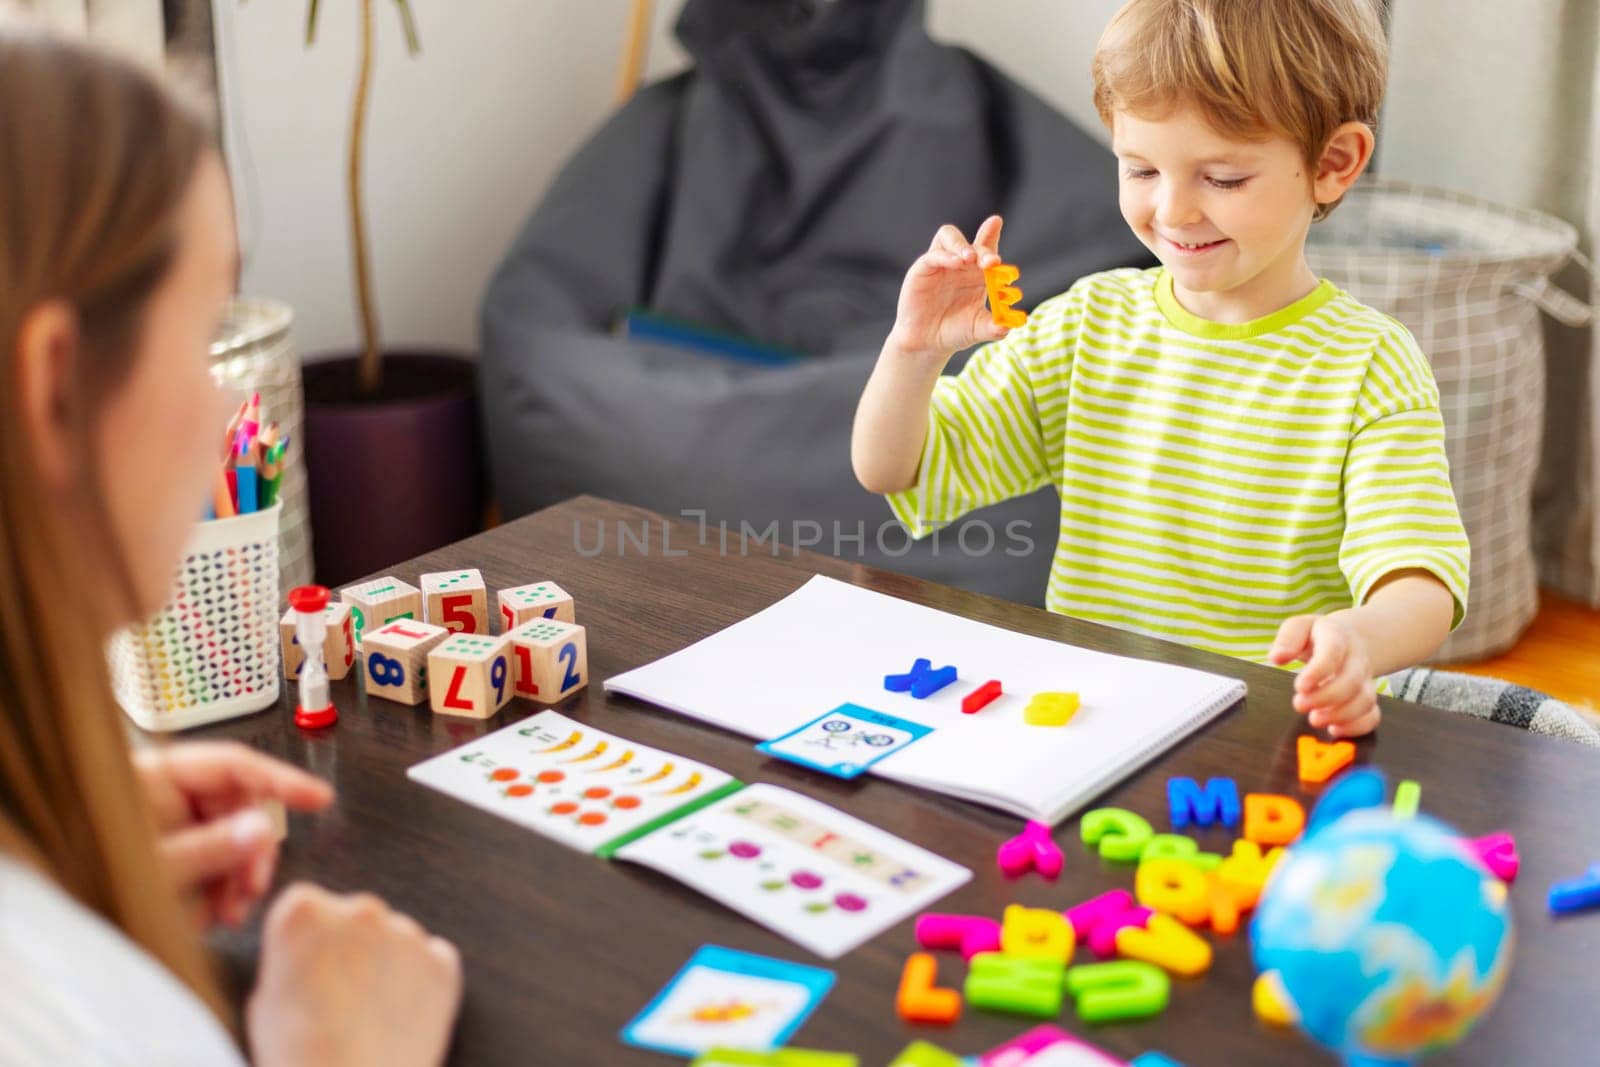 Young boy playing with letter block facing adult. Language development tools on table. Early education concept. Design for educational material